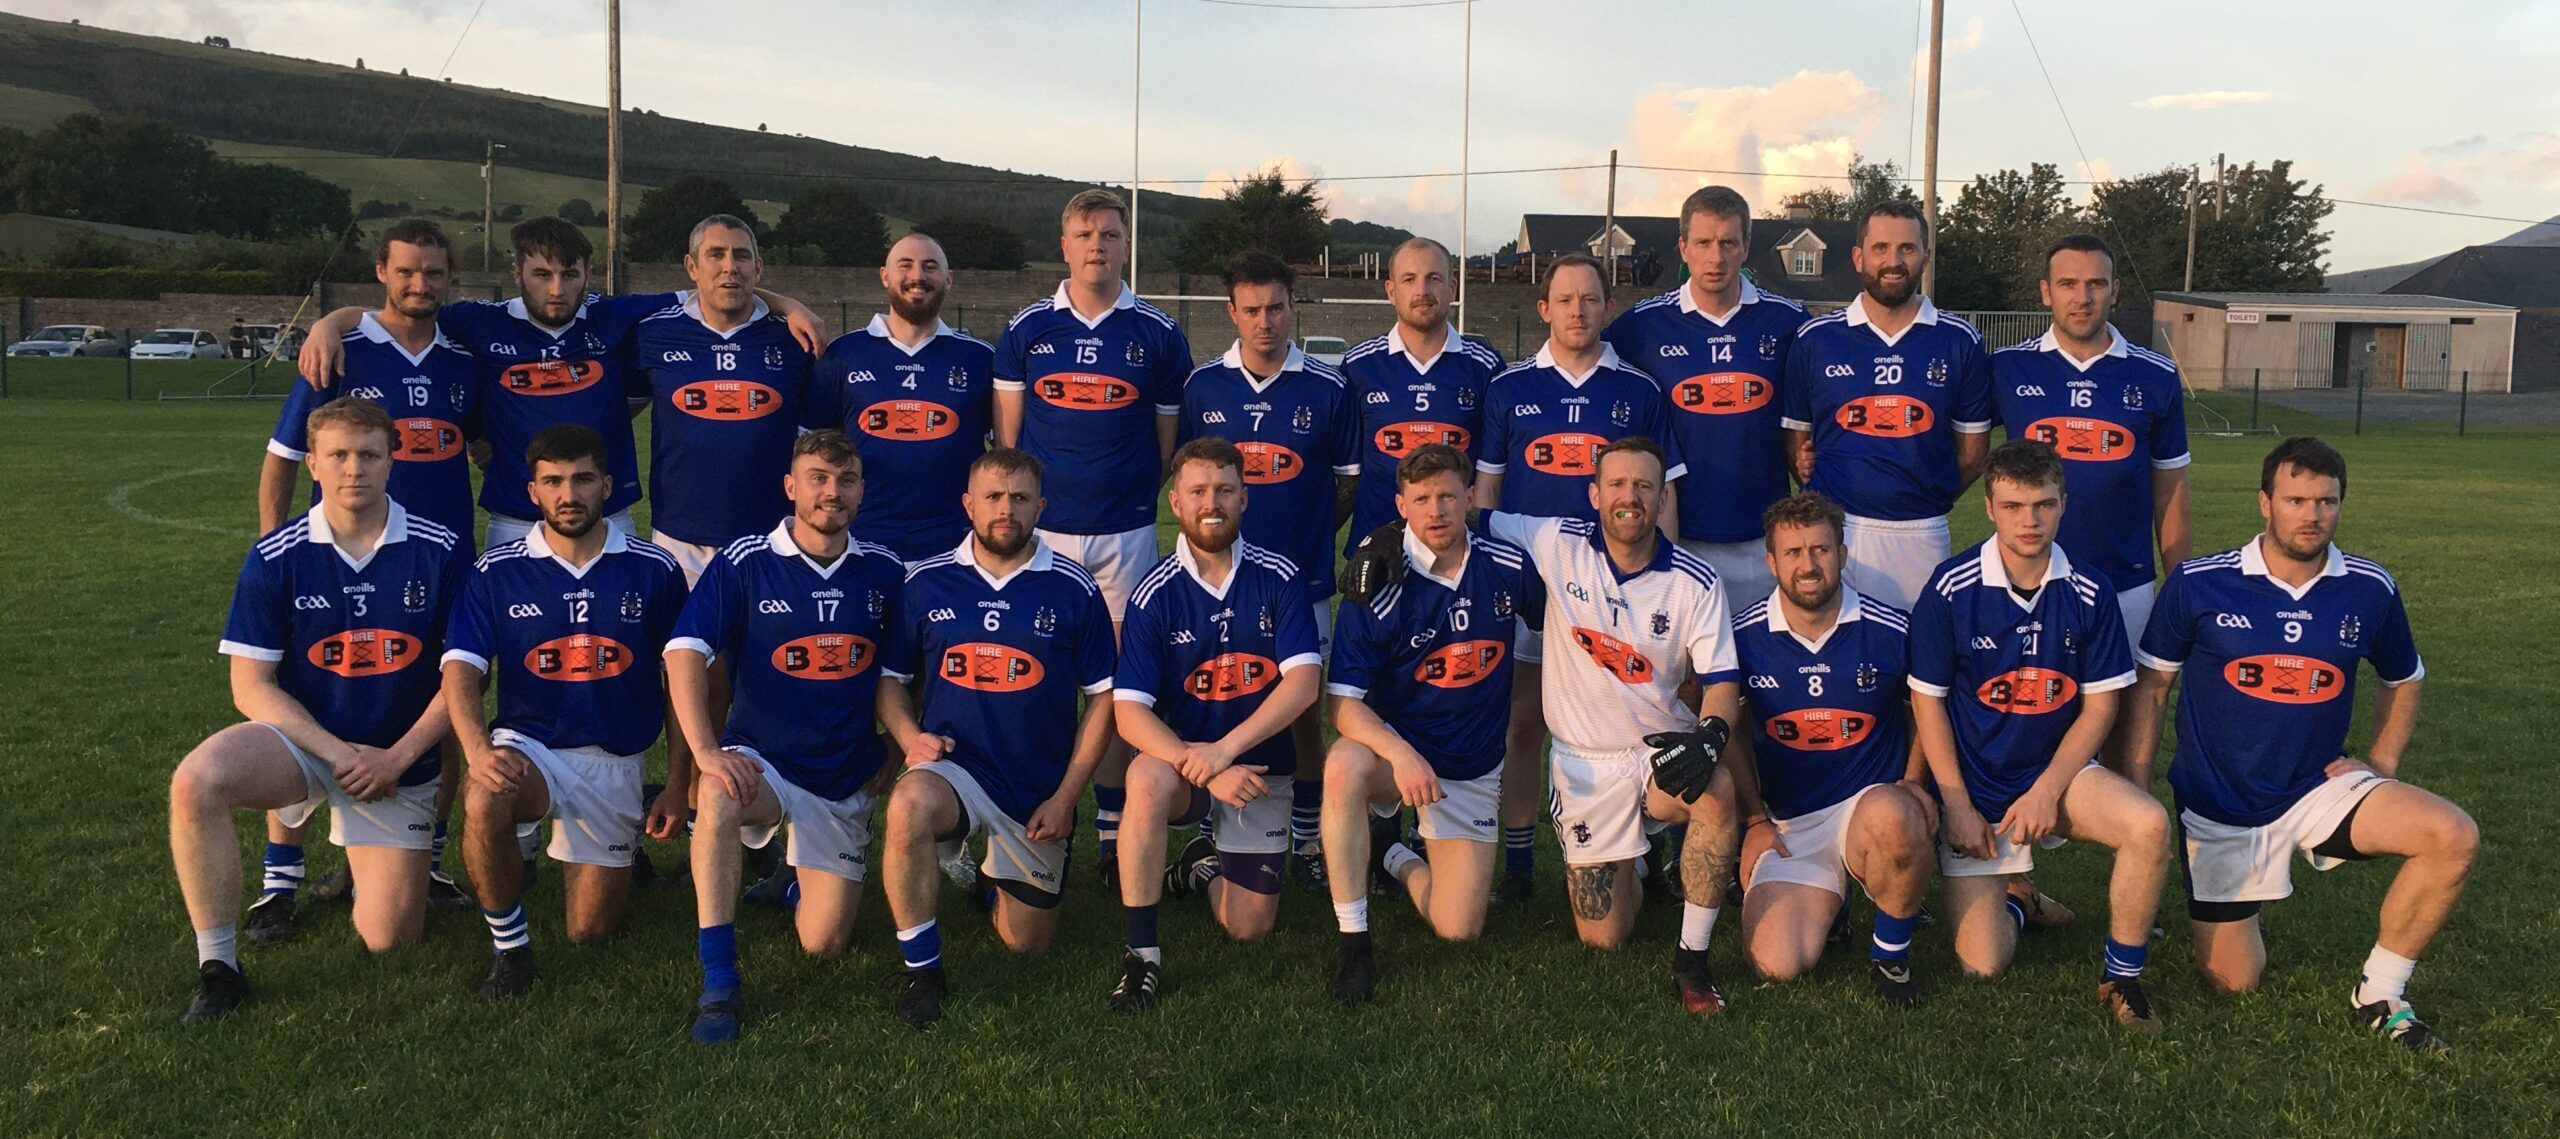 Kilbride Exit the Championship at the hands of Baltinglass